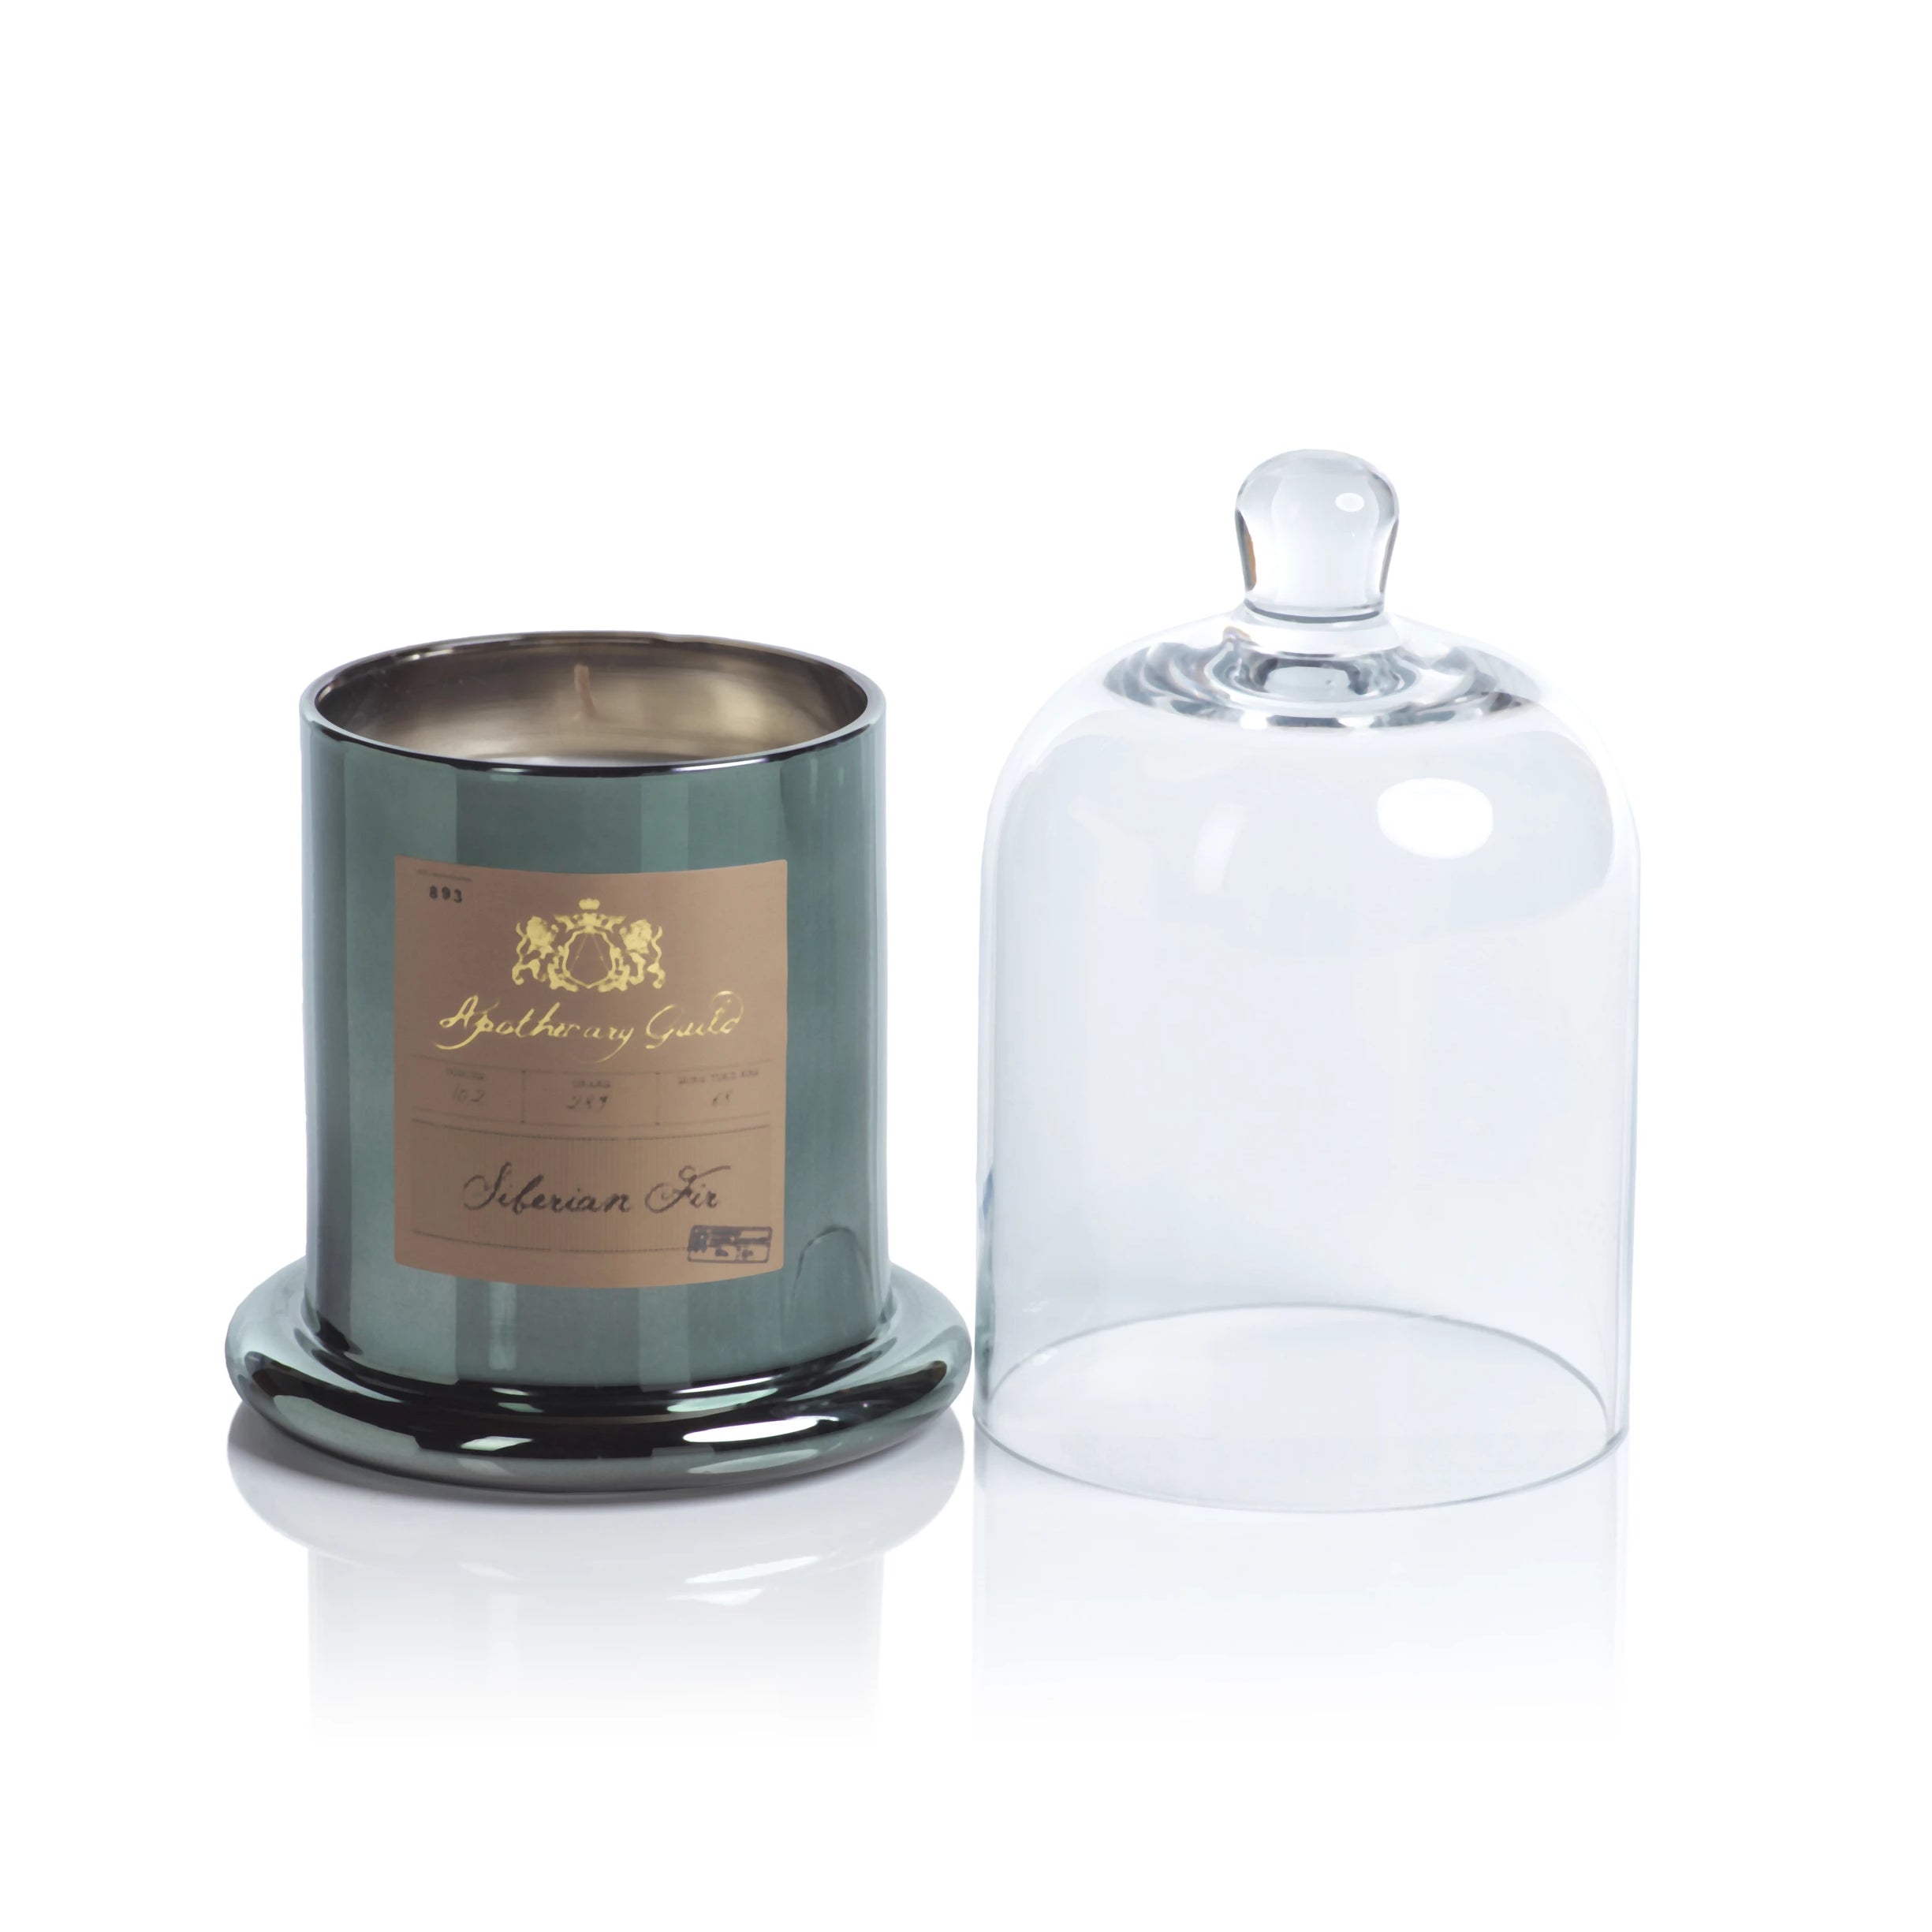 Apothecary Guild Domed Candle - Green - CARLYLE AVENUE